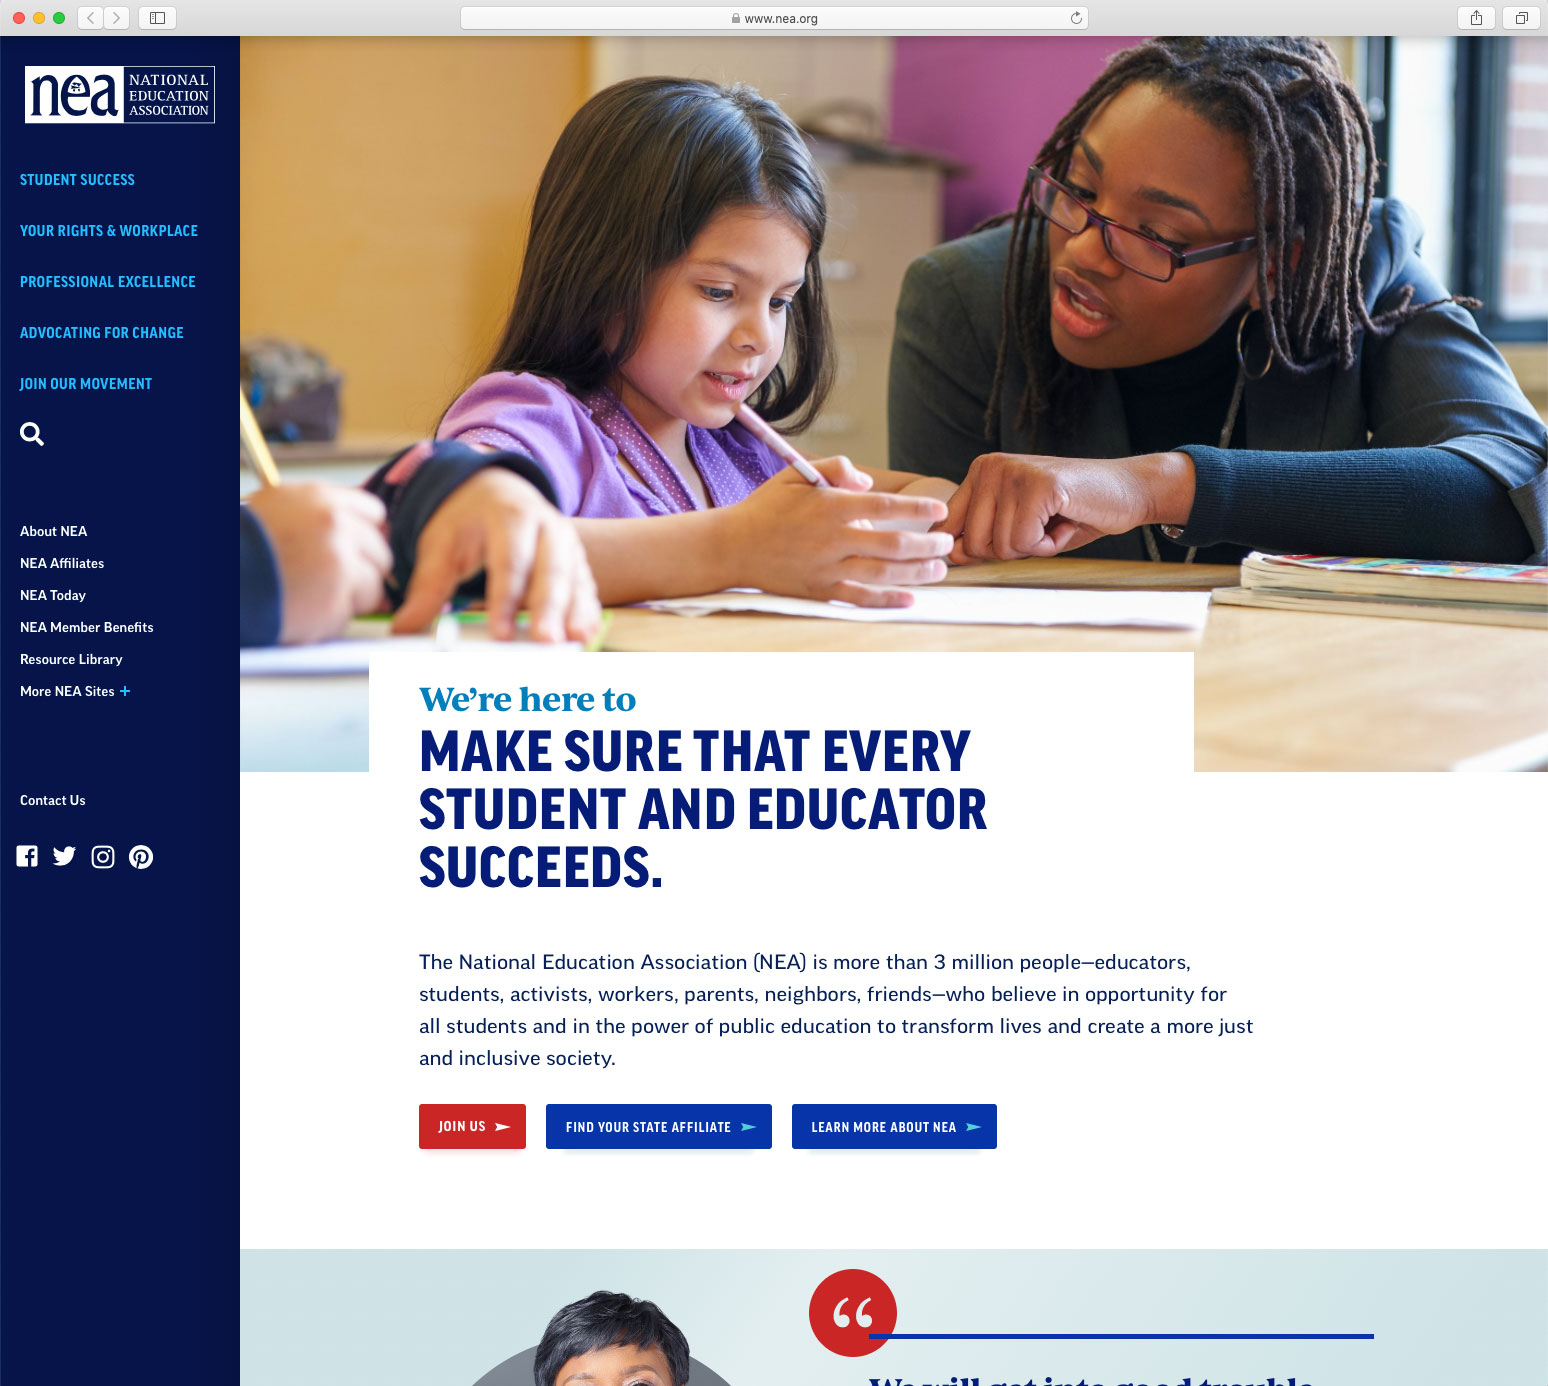 NEA's homepage after the redesign